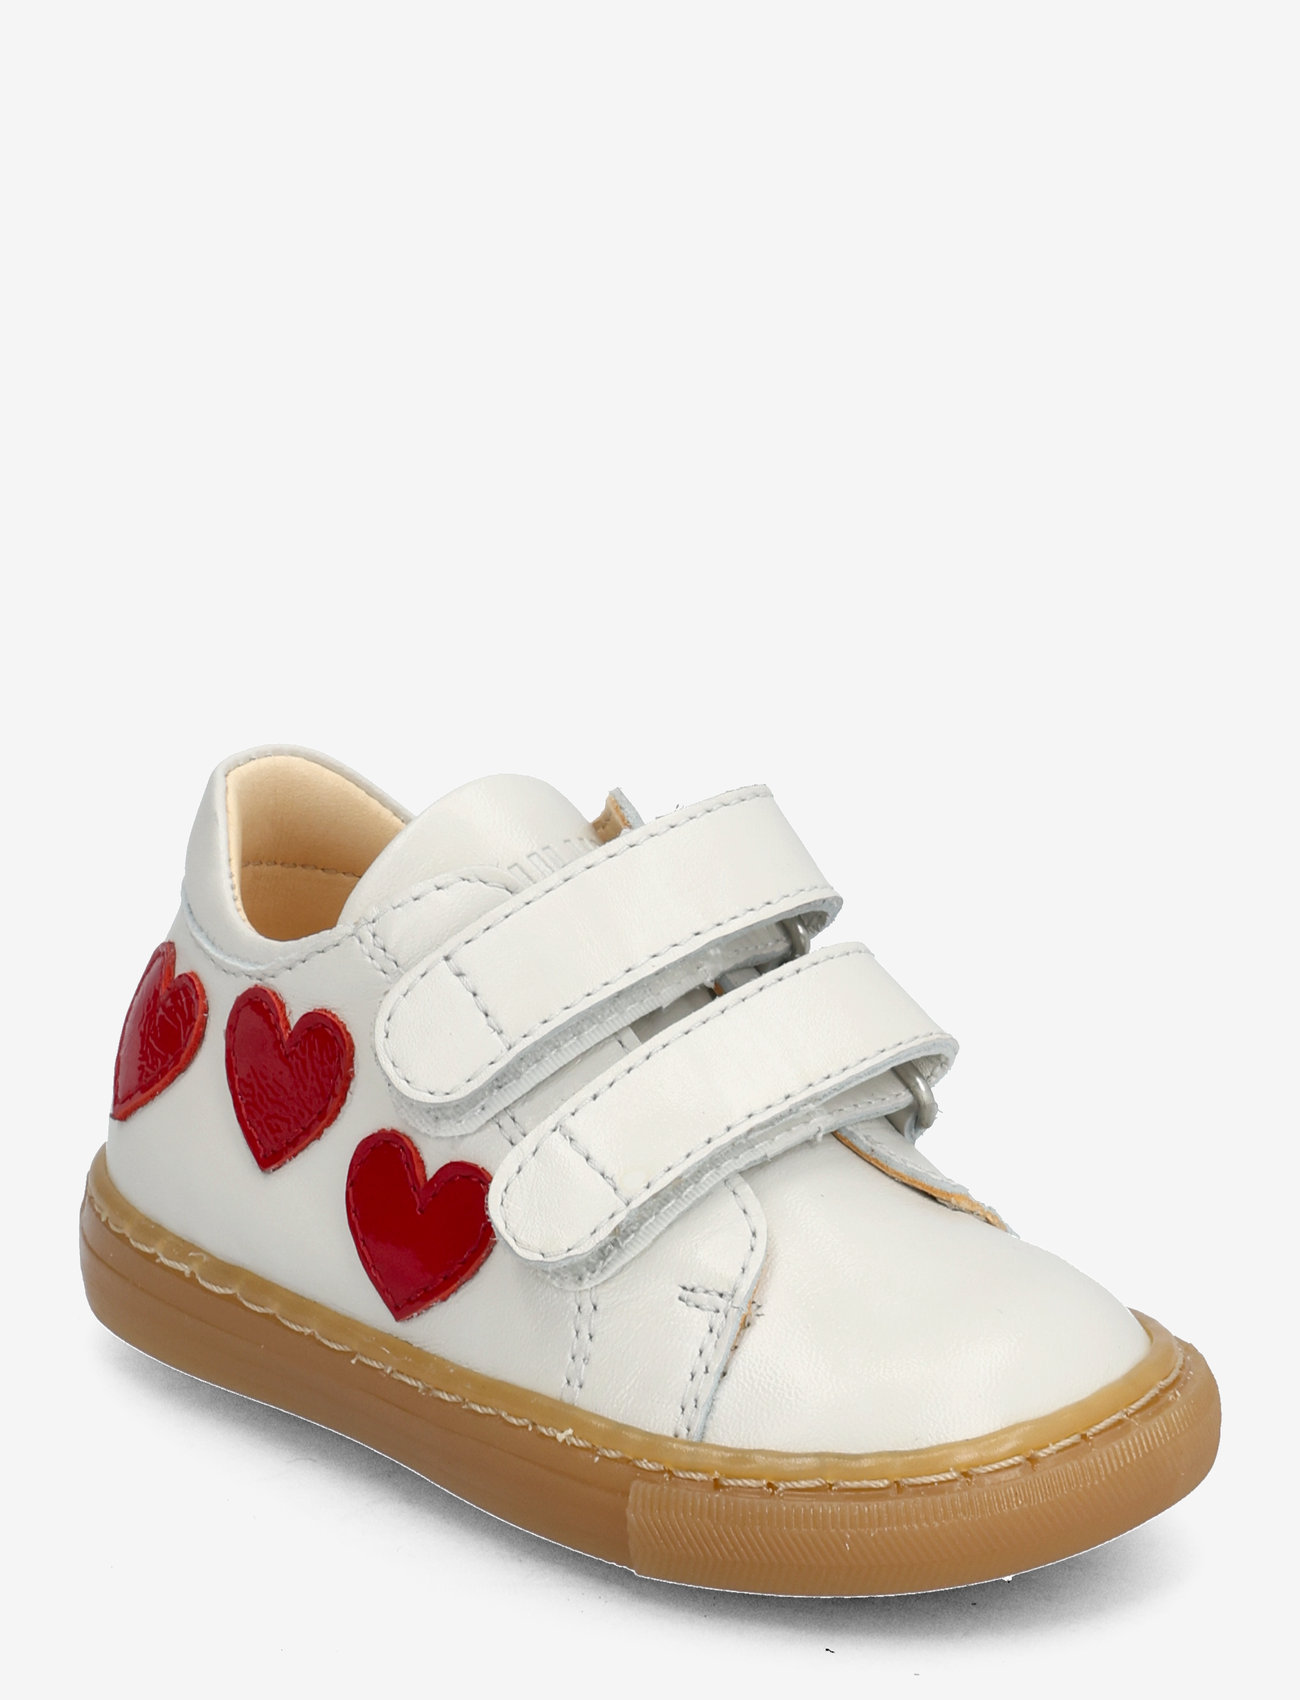 ANGULUS - Shoes - flat - with velcro - sommarfynd - 1493/a003 off white/hearts - 0